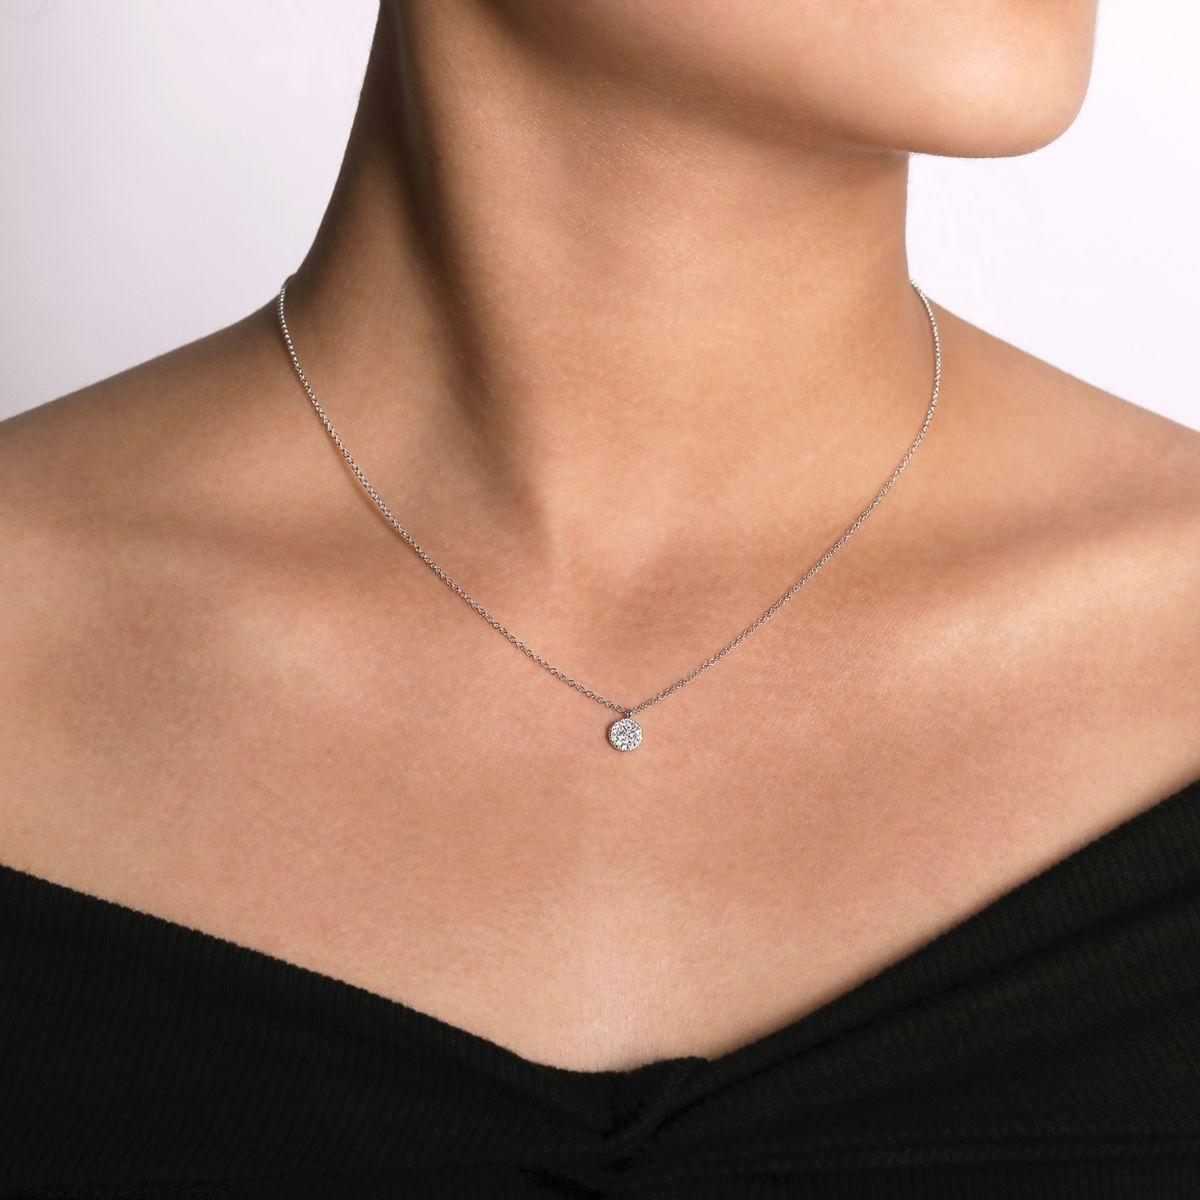 Solitaire Inverted V Shaped Pendant